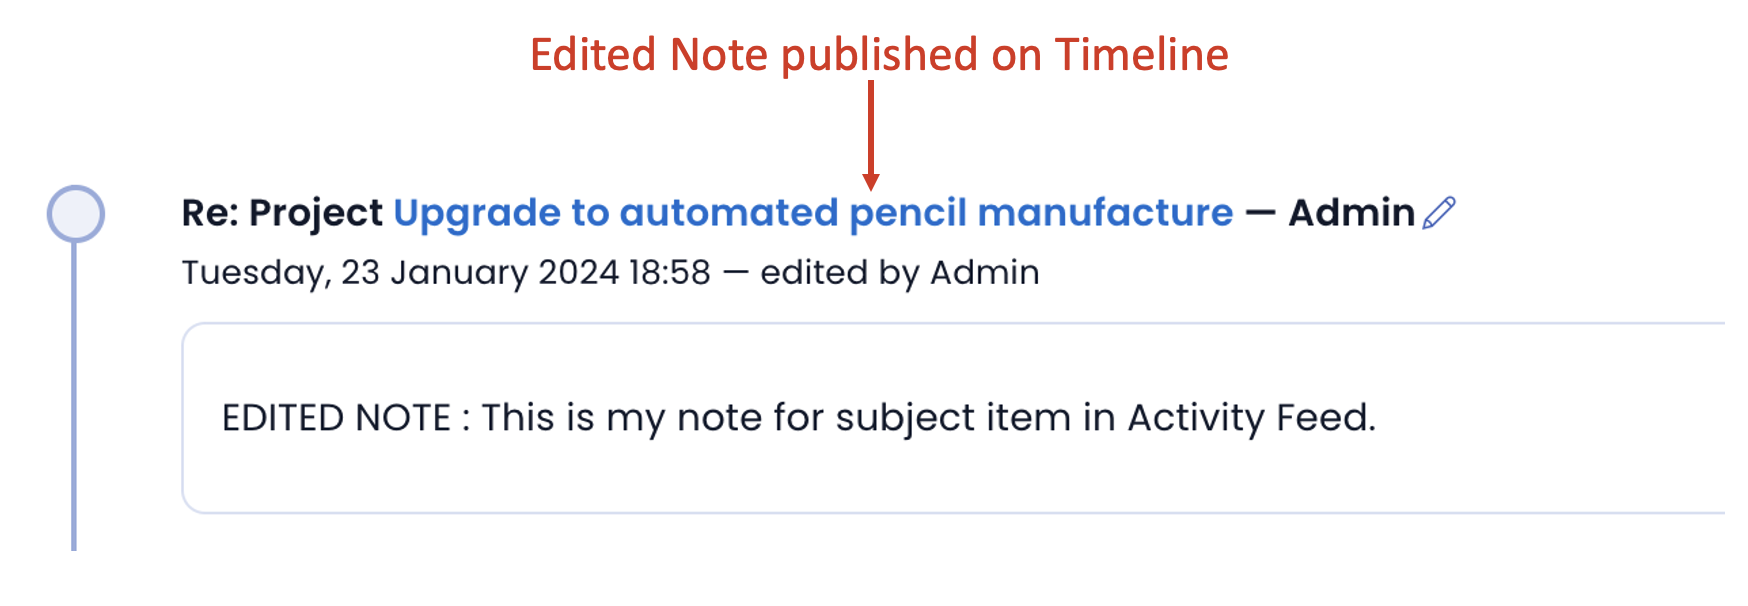 Image showing edited note published on Activity Feed timeline